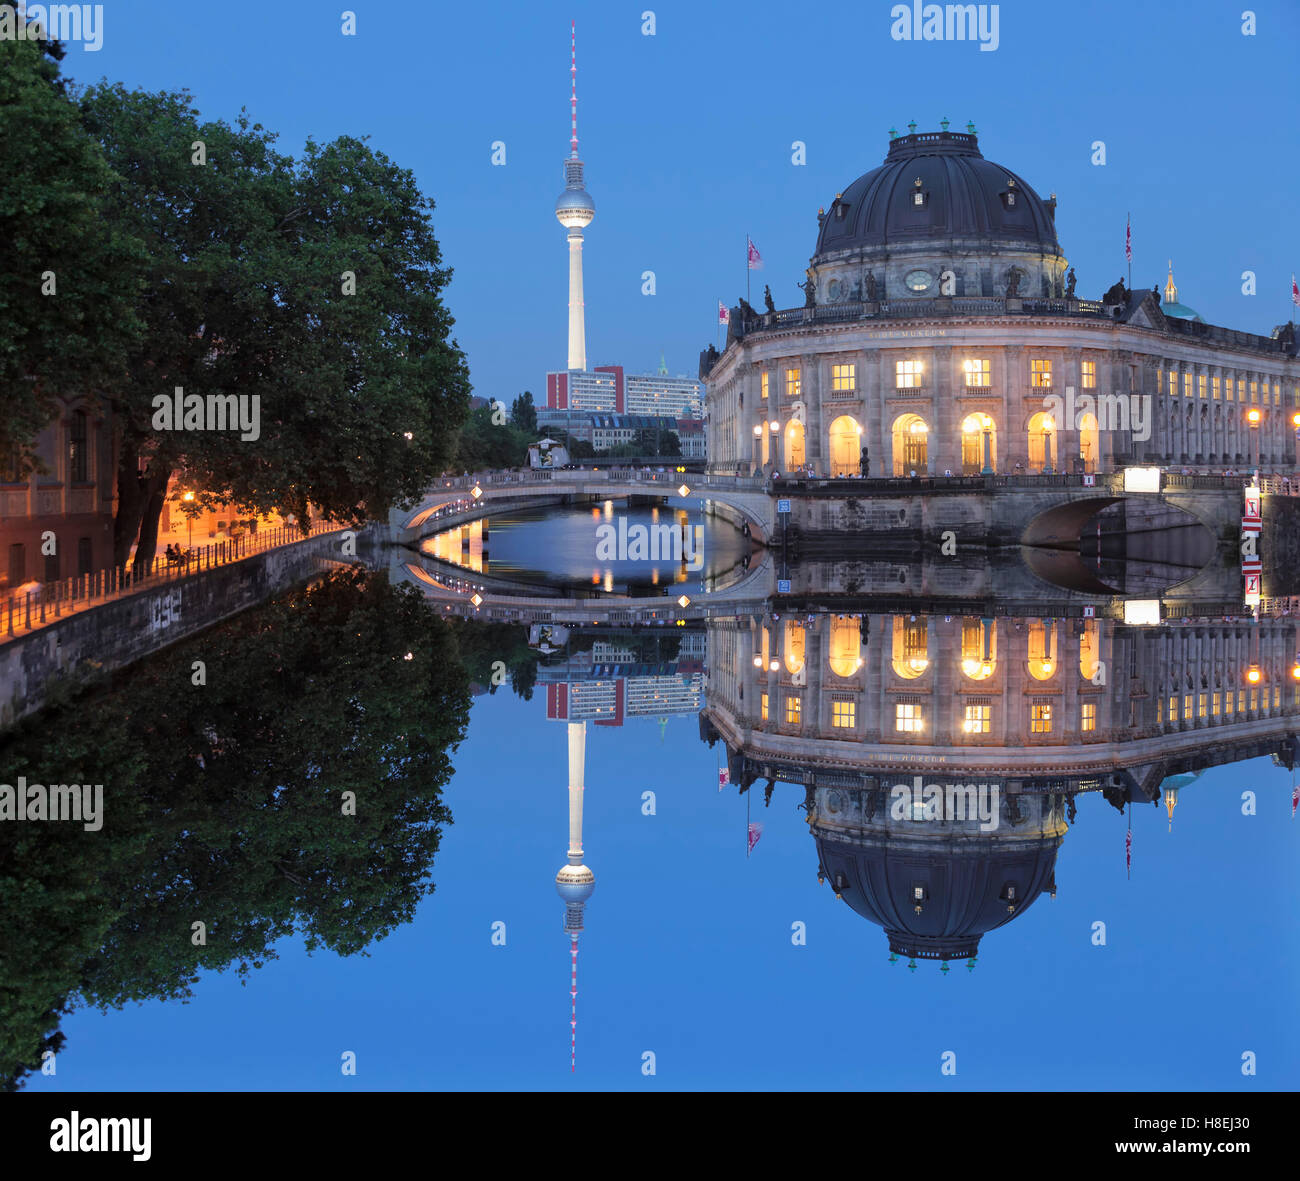 Bode Museum and TV Tower reflecting on Spree River, Museum Island, UNESCO World Heritage Site, Mitte, Berlin, Germany, Europe Stock Photo